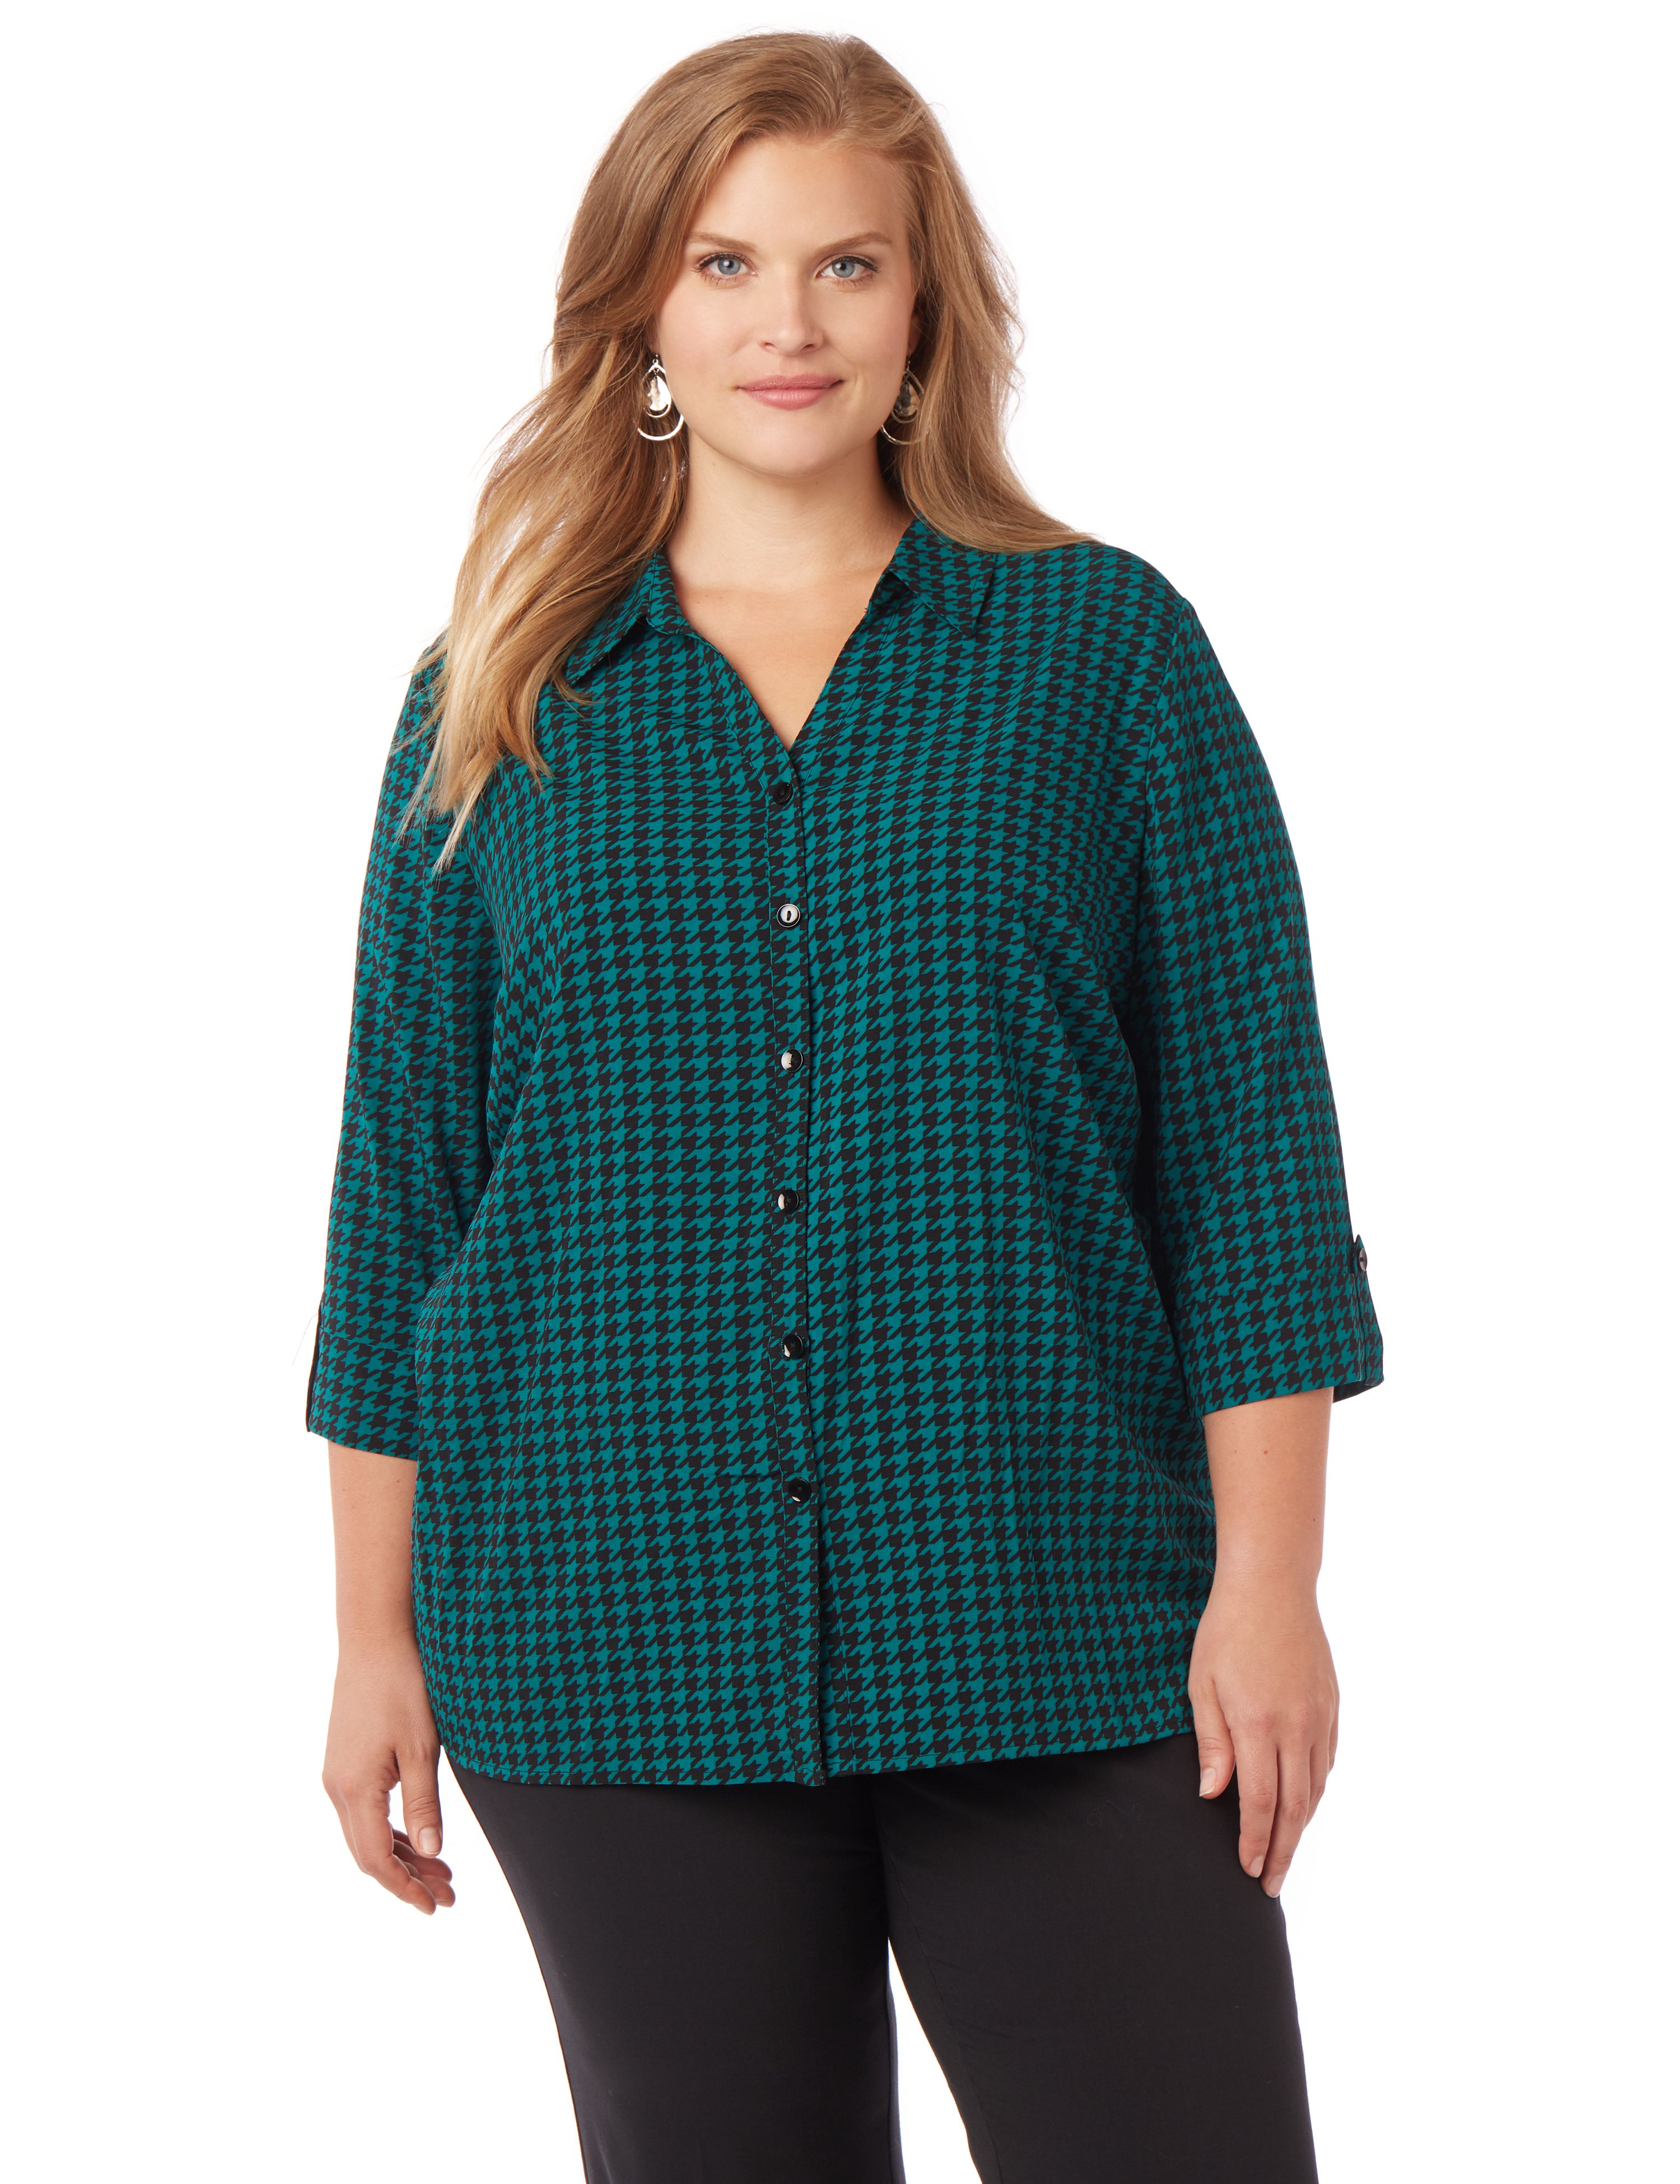 Plus Size Clearance Assortment | Catherines